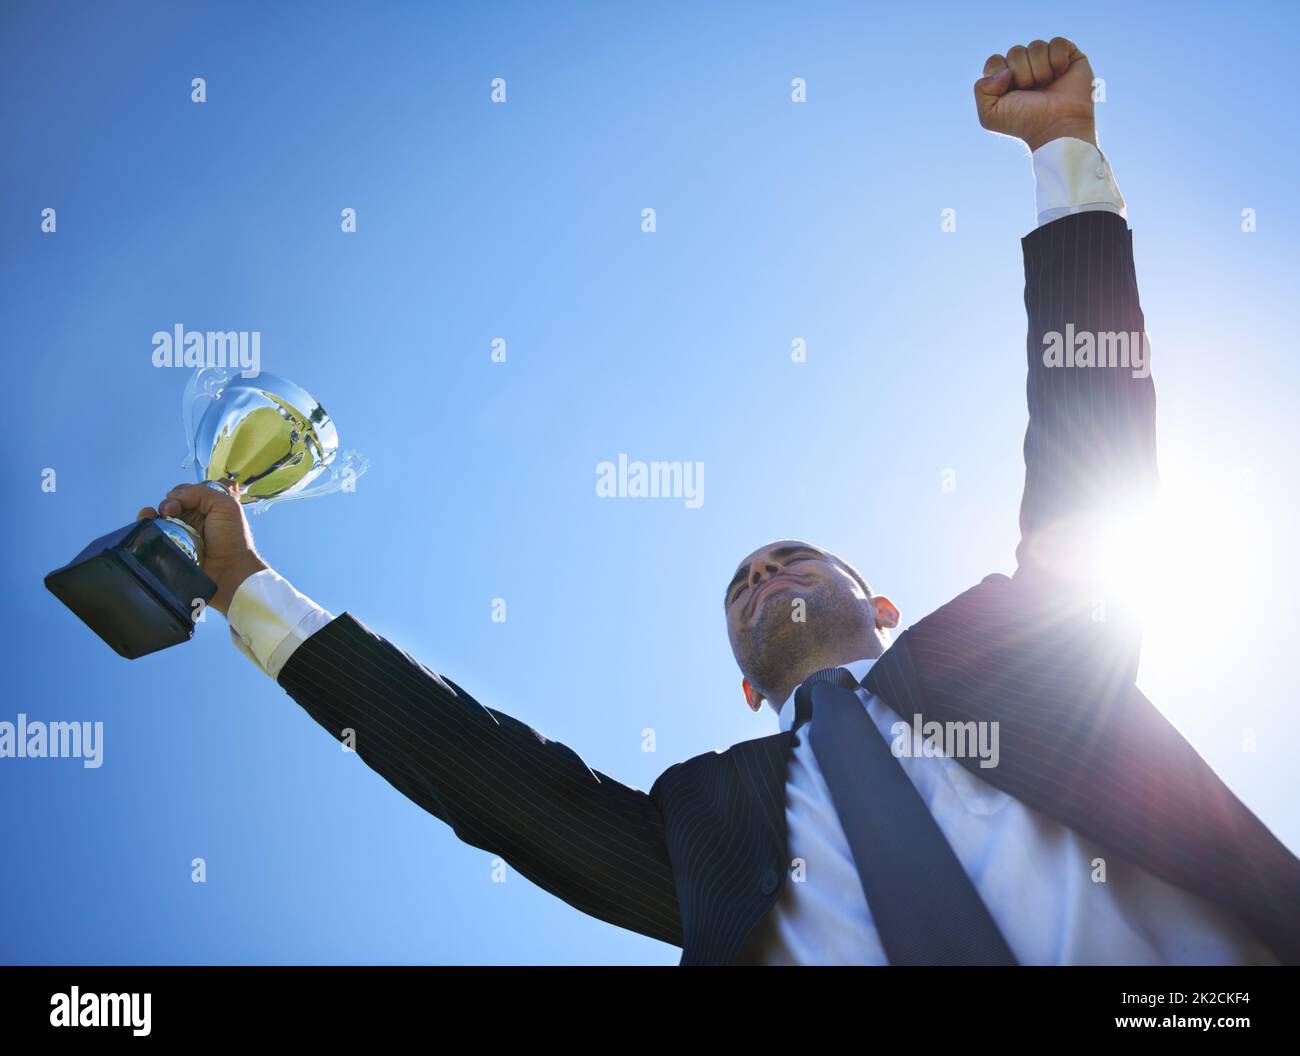 Corporate success. Low angle view of a businessman holding a cup. Stock Photo